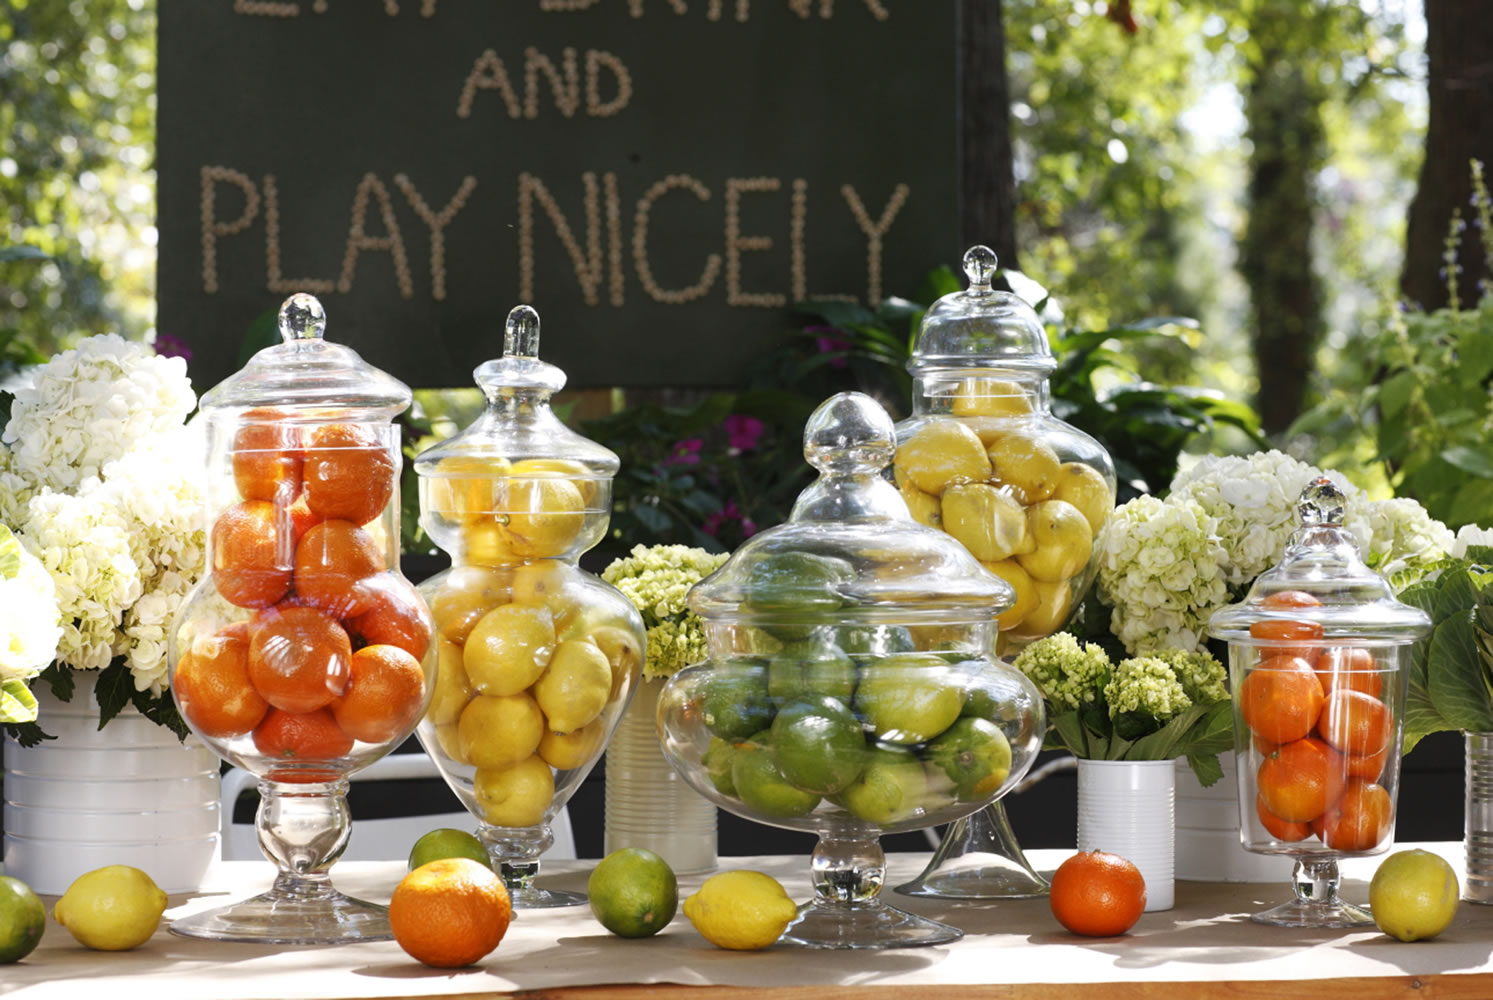 Designer Brian Patrick Flynn suggests grouping fruits in clear glass vessels.